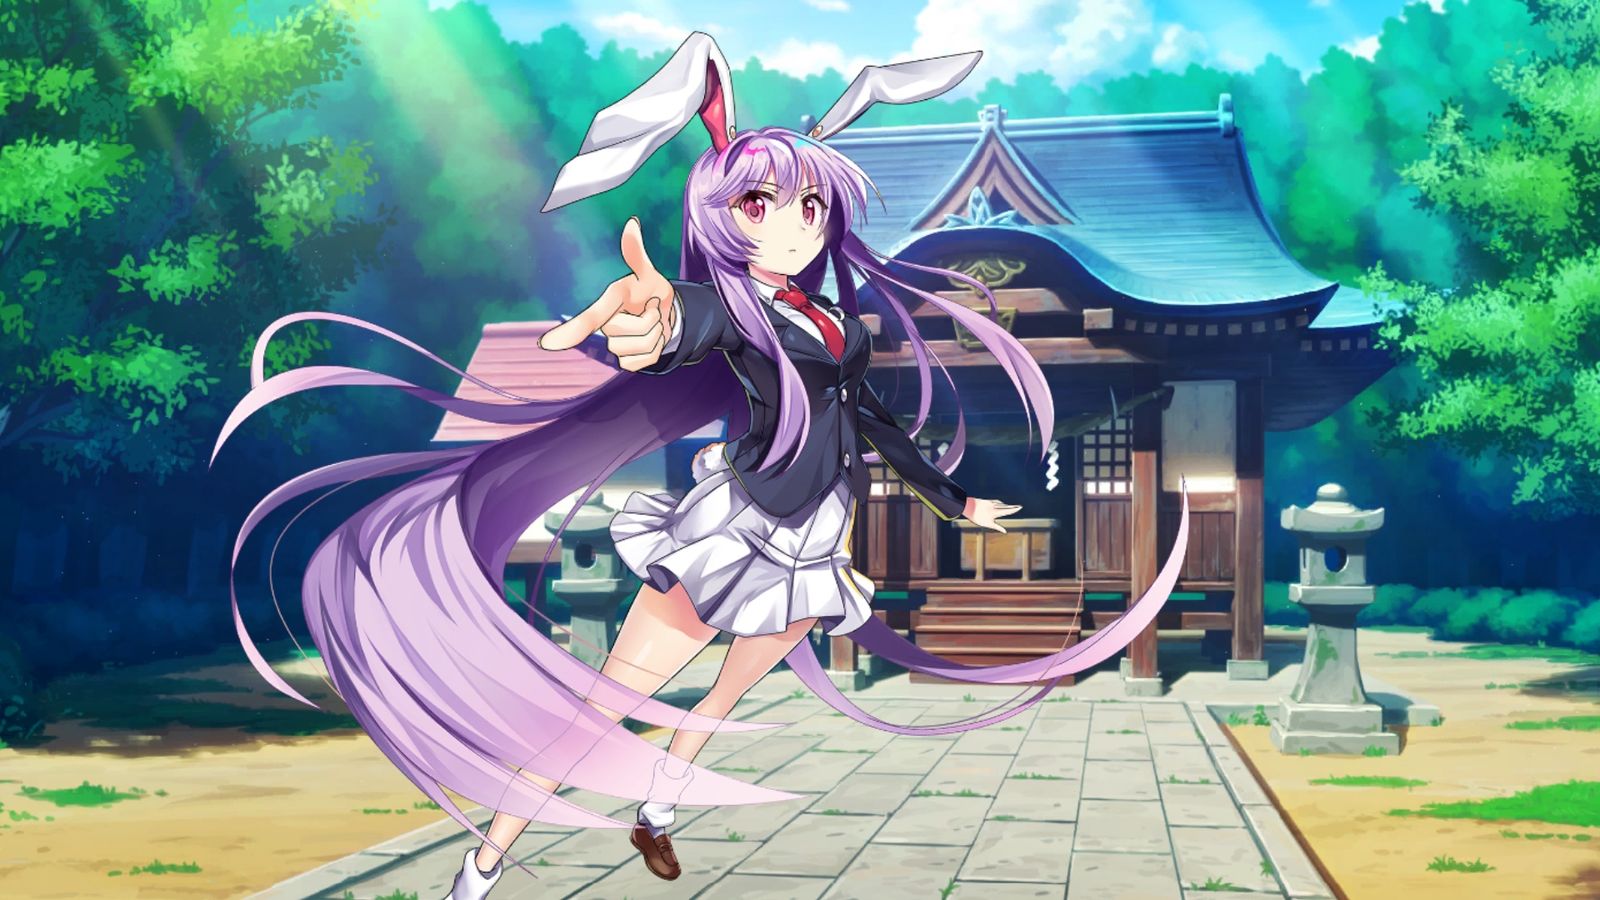 A purple haired girl in a school uniform in front of a woodland background